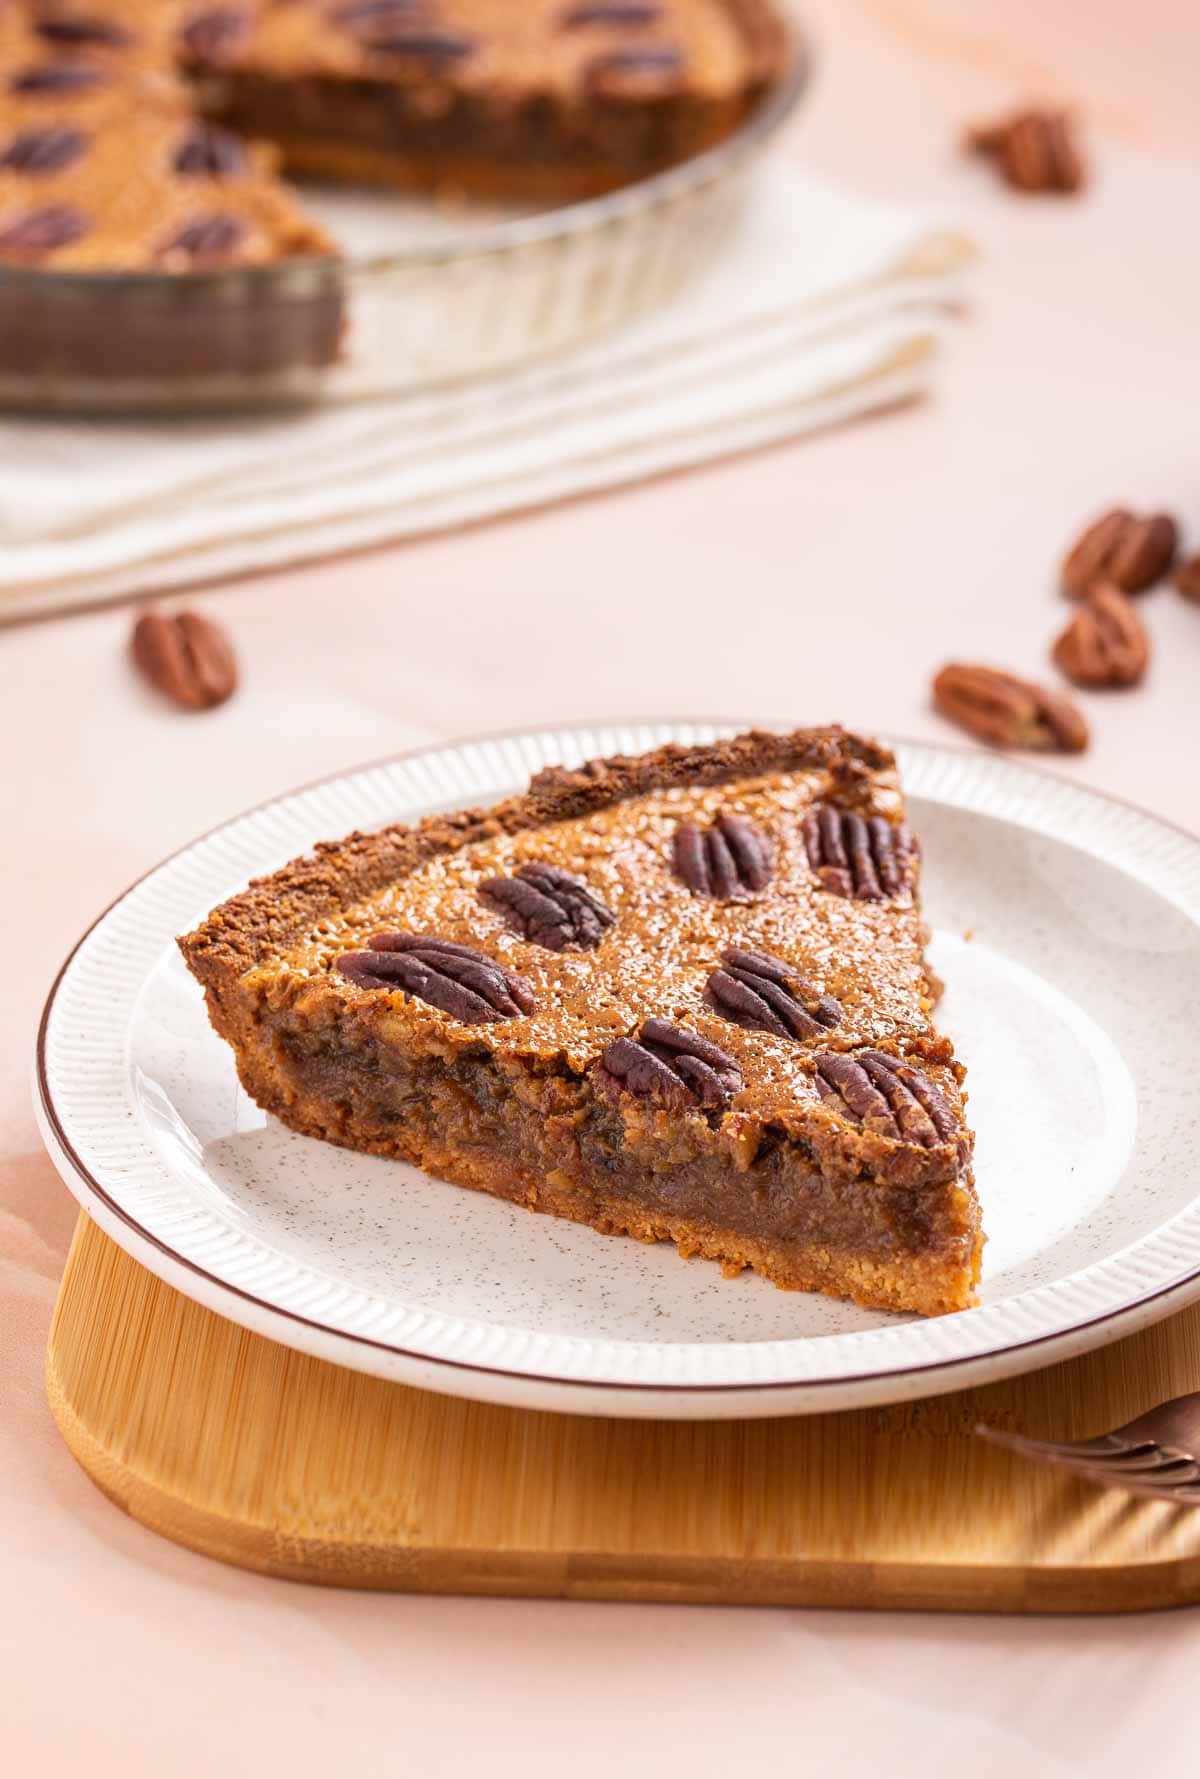 A keto pecan pie with a slice taken out of it.